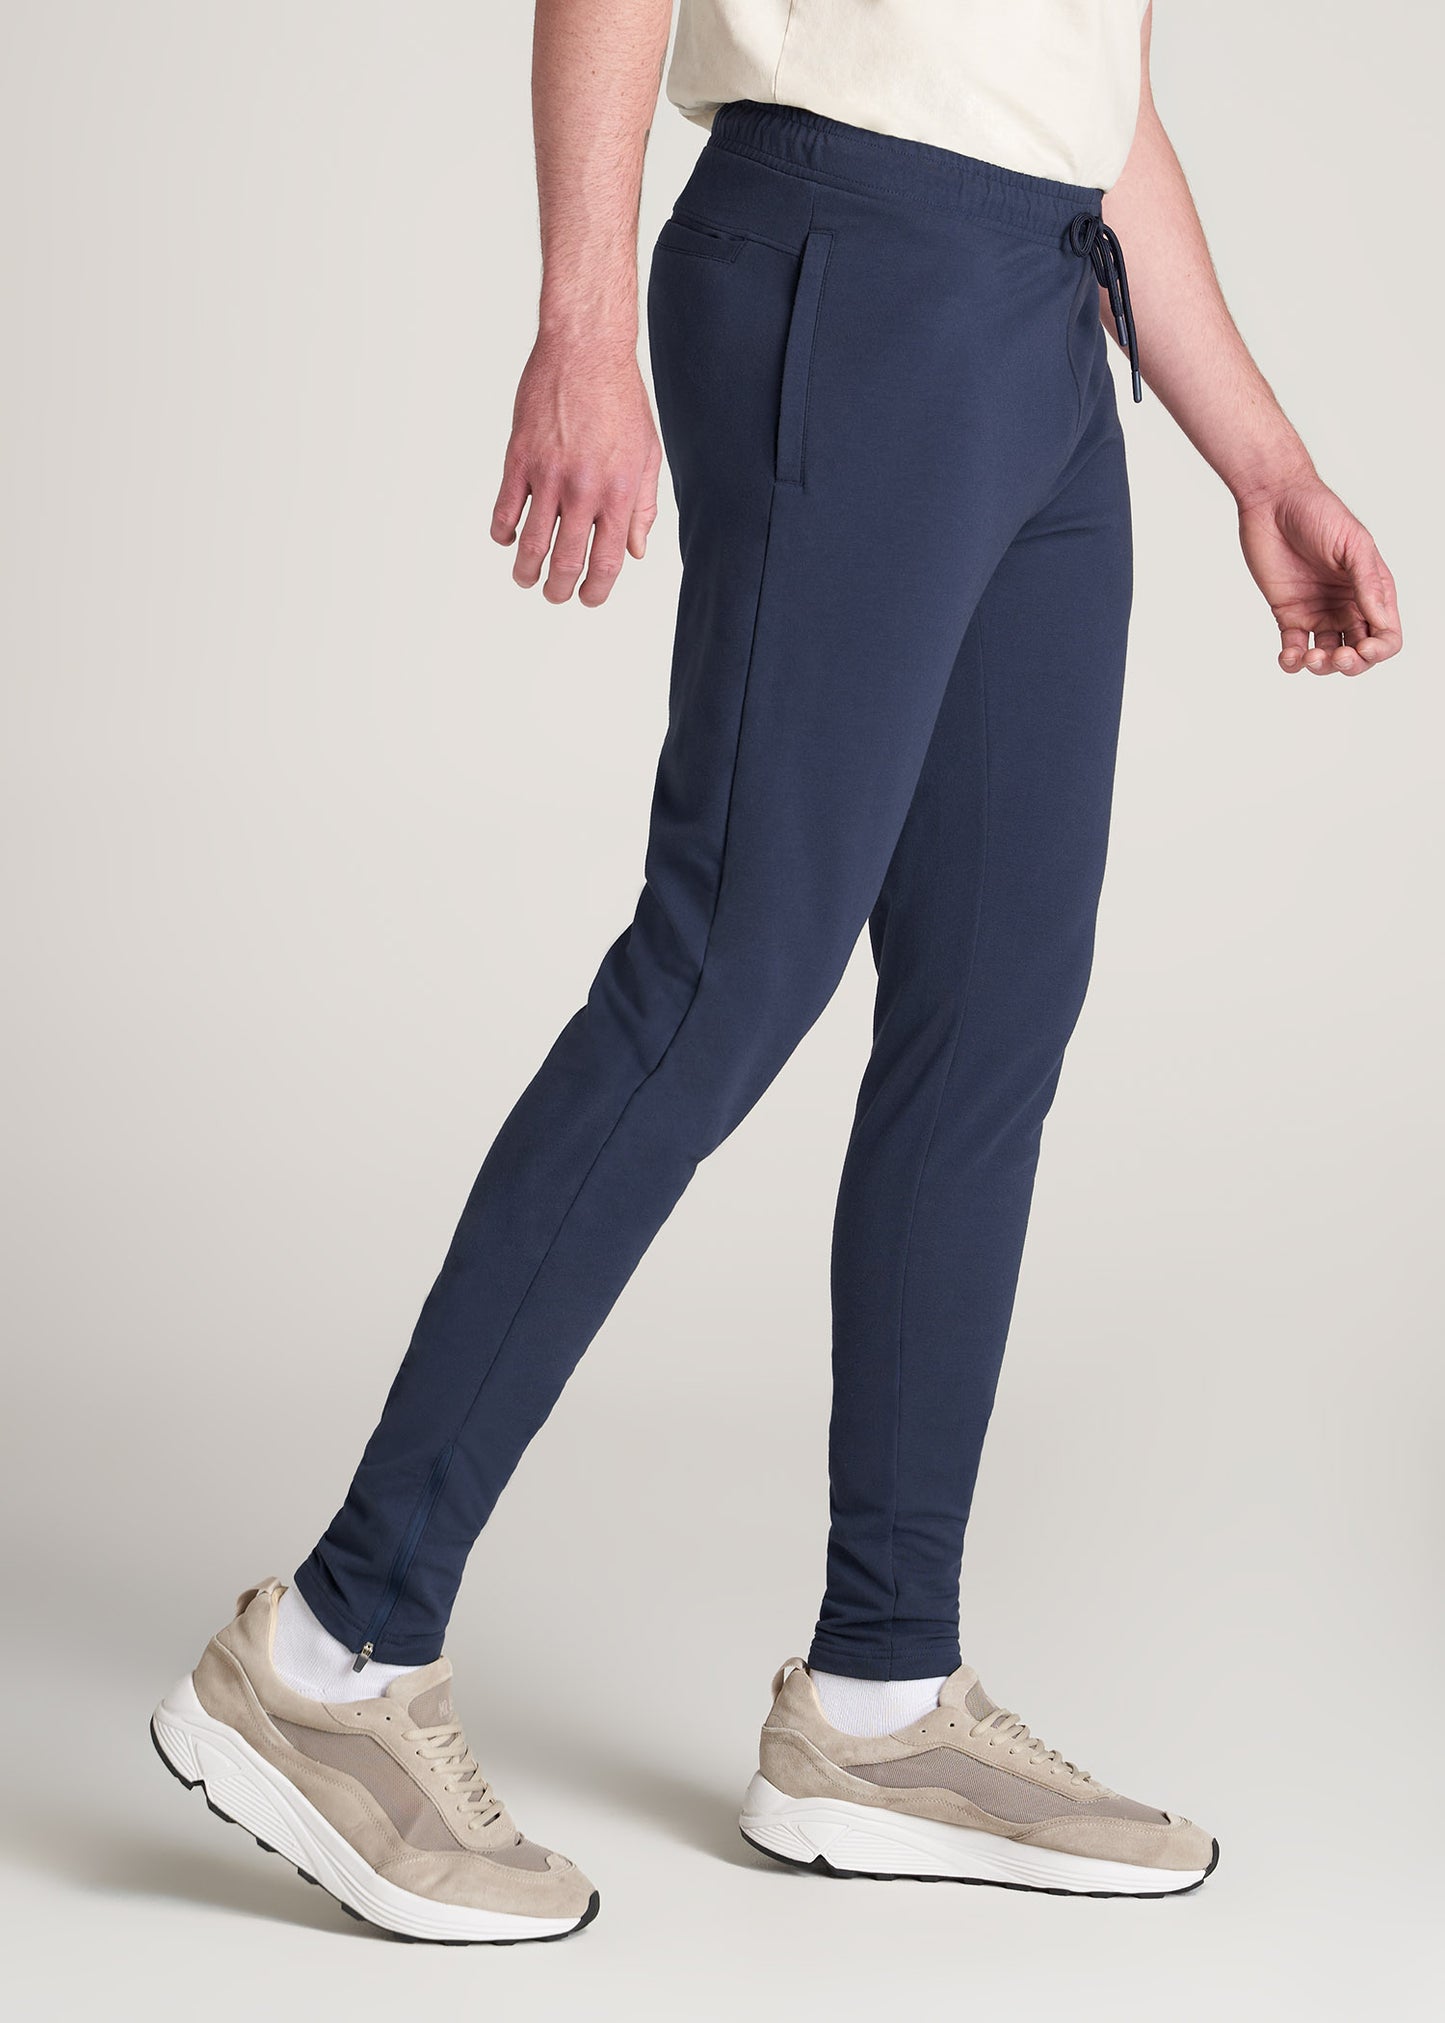       American-Tall-Men-Light-Weight-Tapered-French-Terry-Jogger-Marine-Navy-side